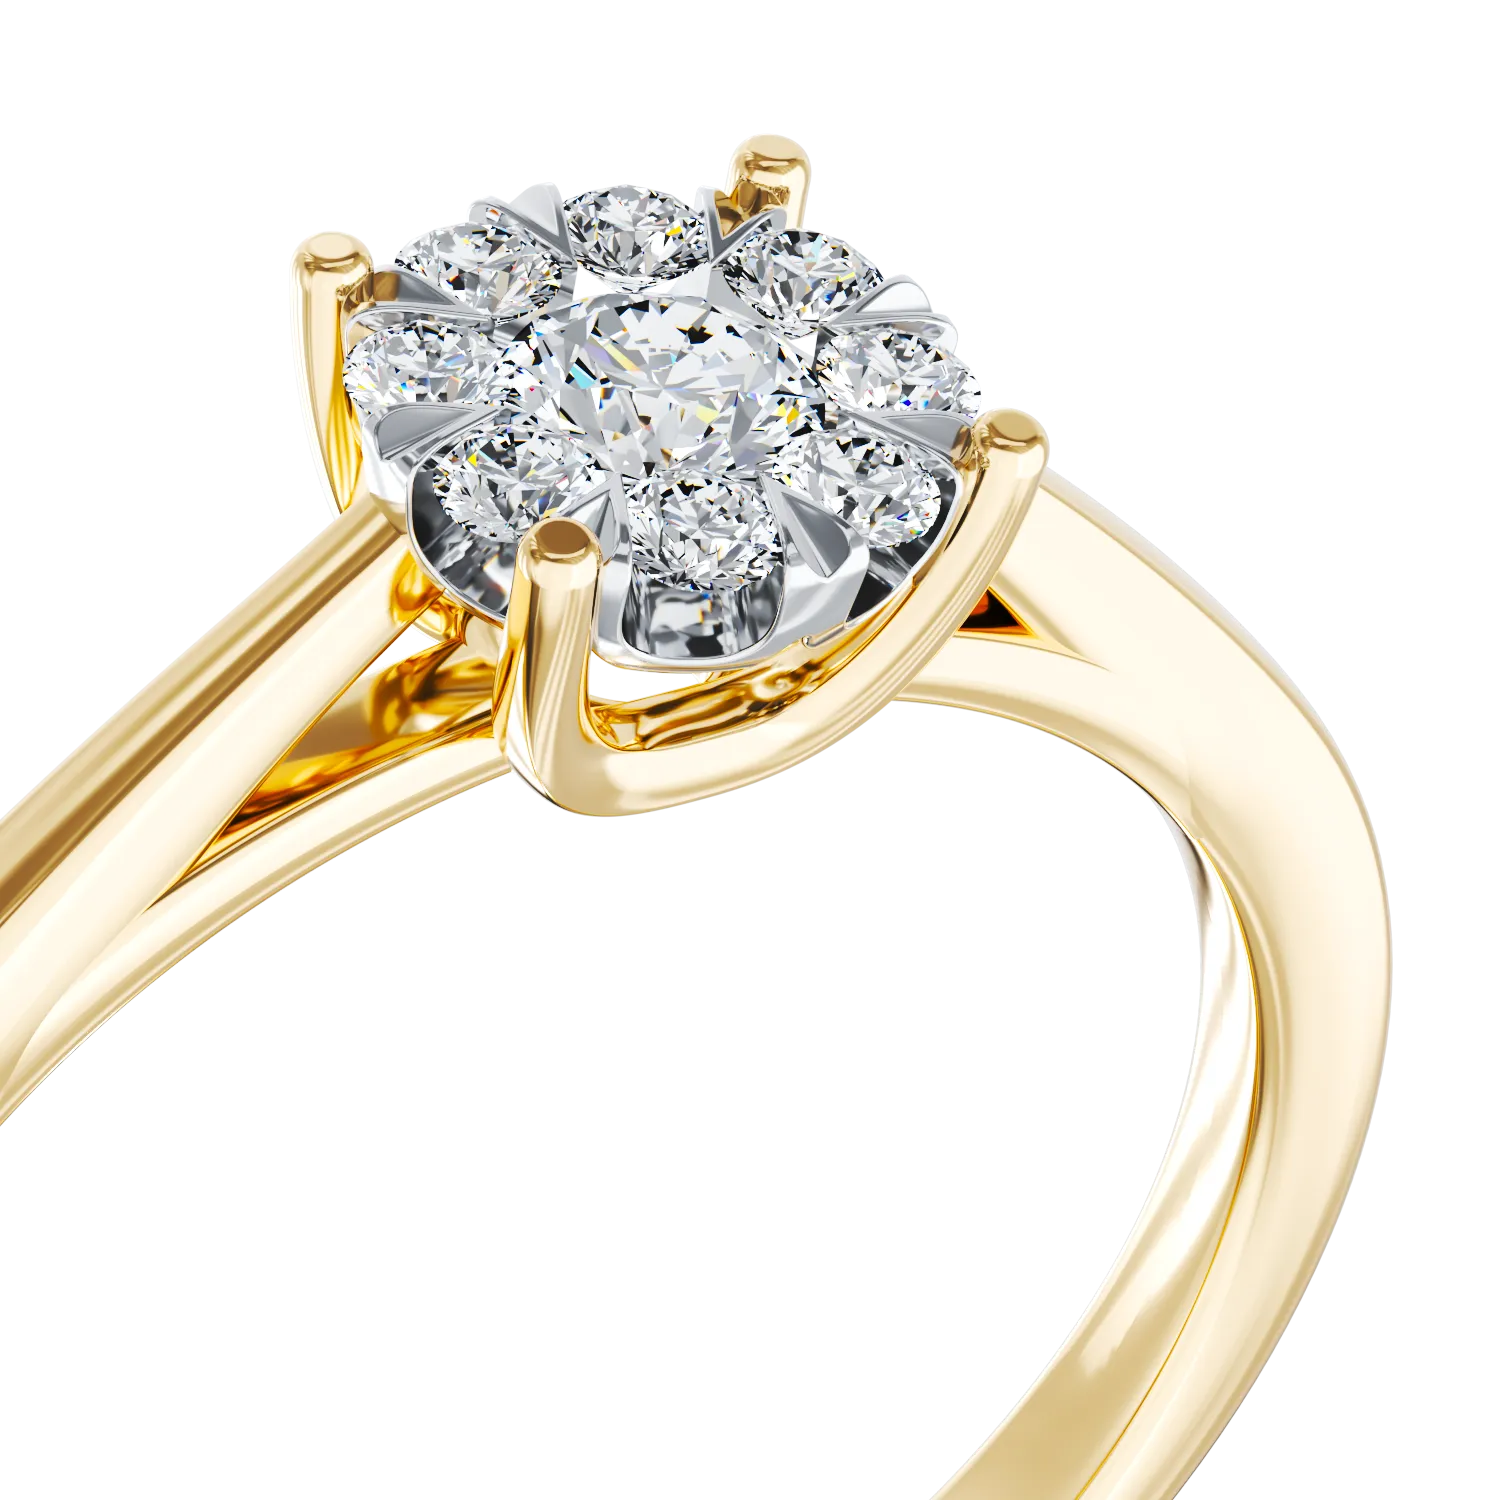 18K yellow gold engagement ring with 0.25ct diamonds